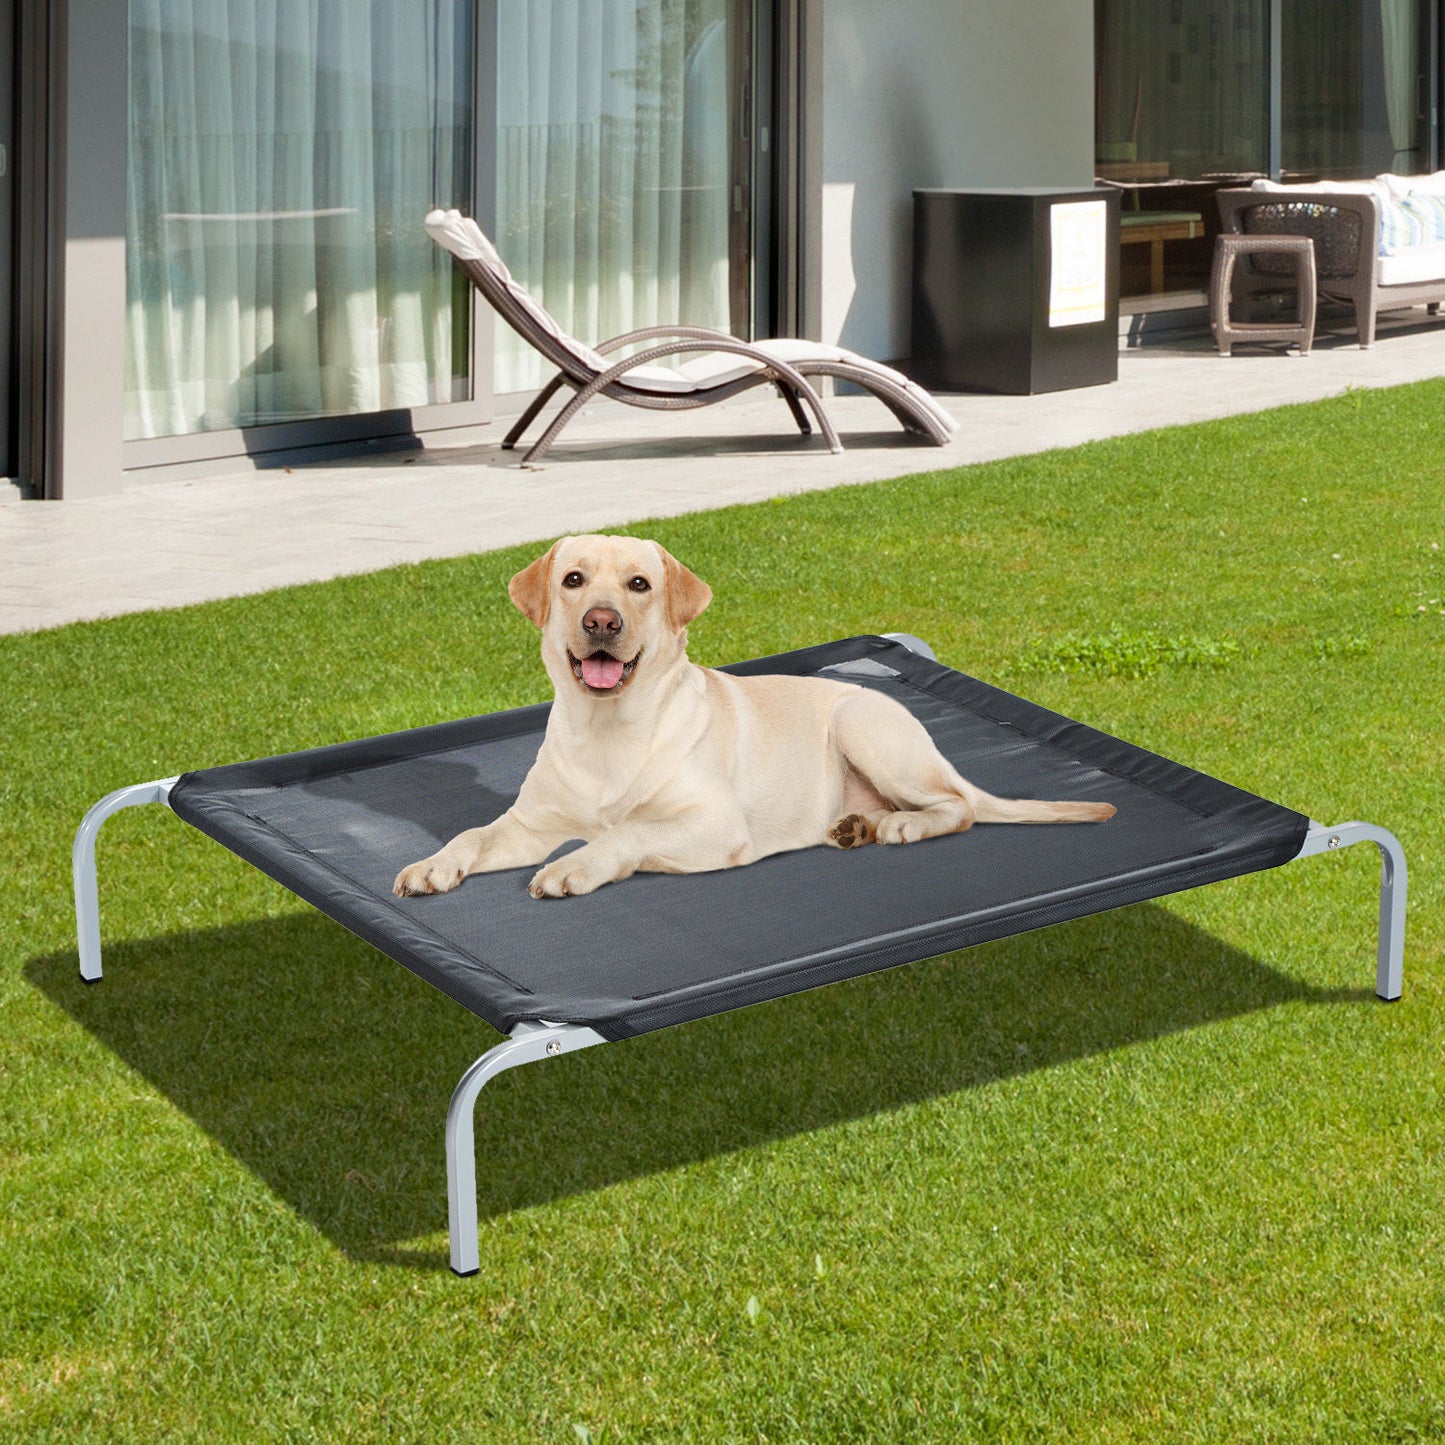 PawHut Medium Dogs Portable Elevated Fabric Bed for Camping Outdoors Black